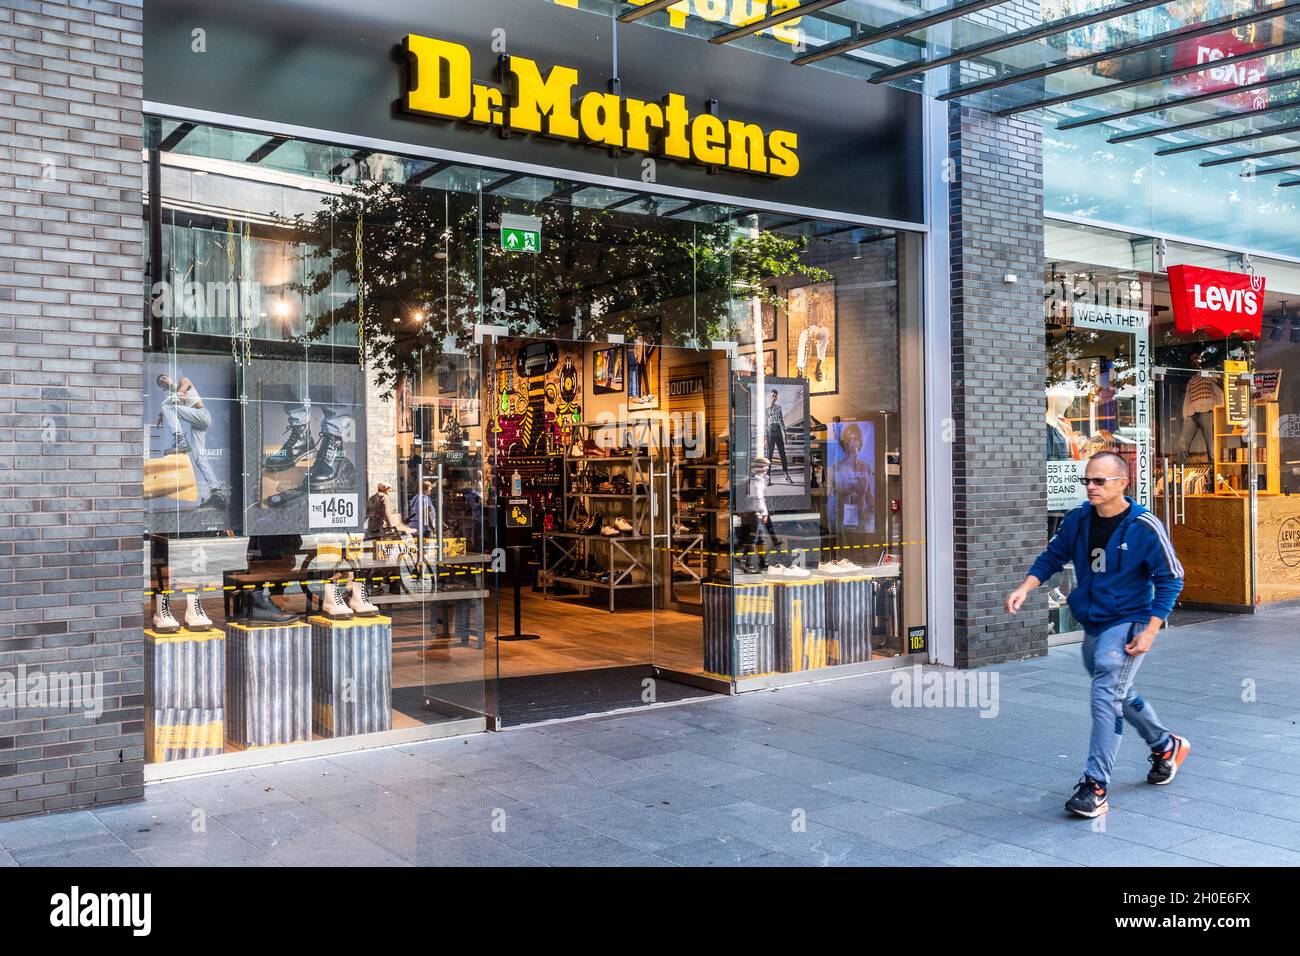 Exterior of Dr. Martens shoe and clothing shop in Liverpool, Merseyside, UK. Stock Photo